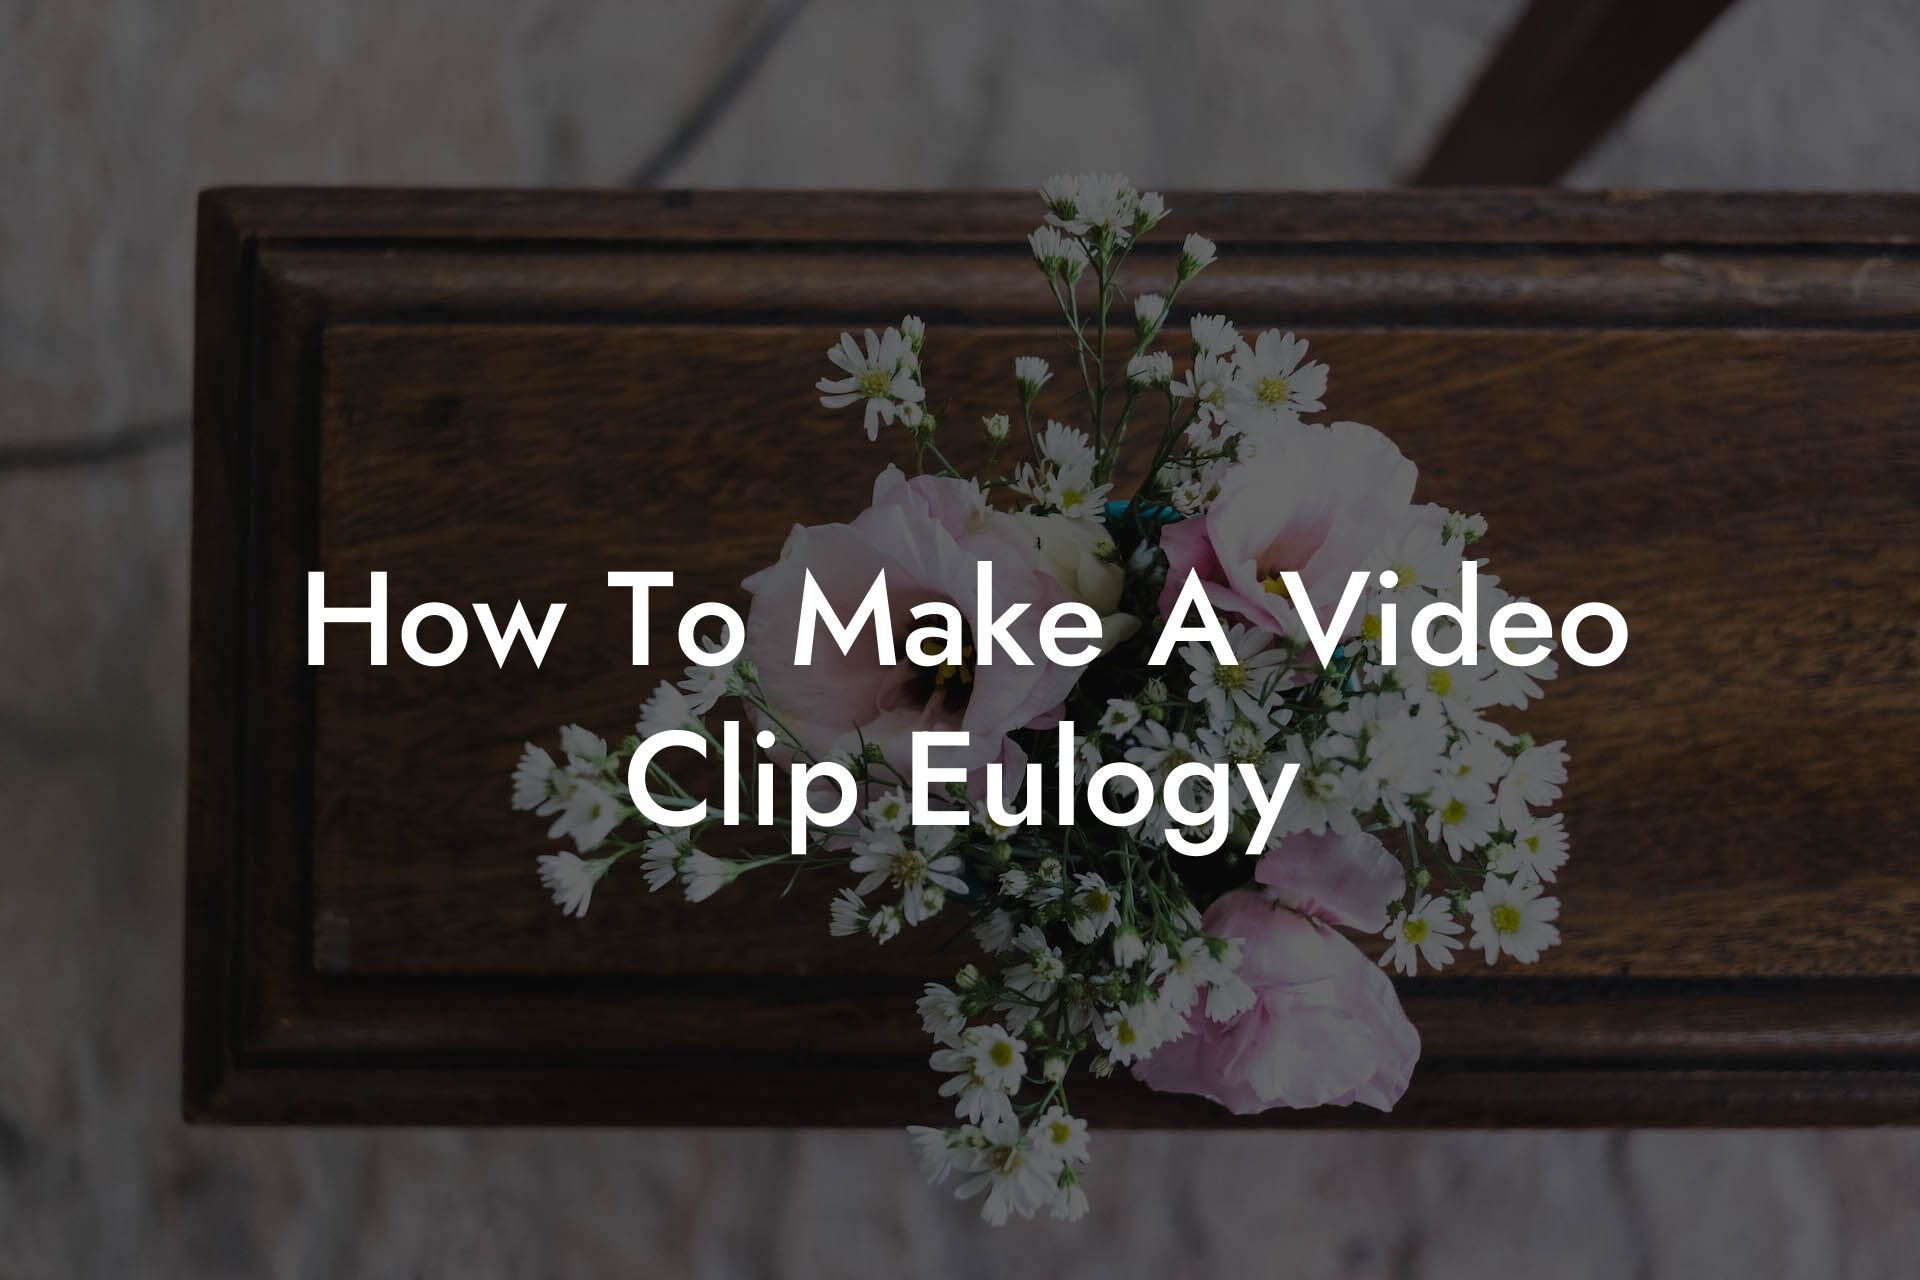 How To Make A Video Clip Eulogy